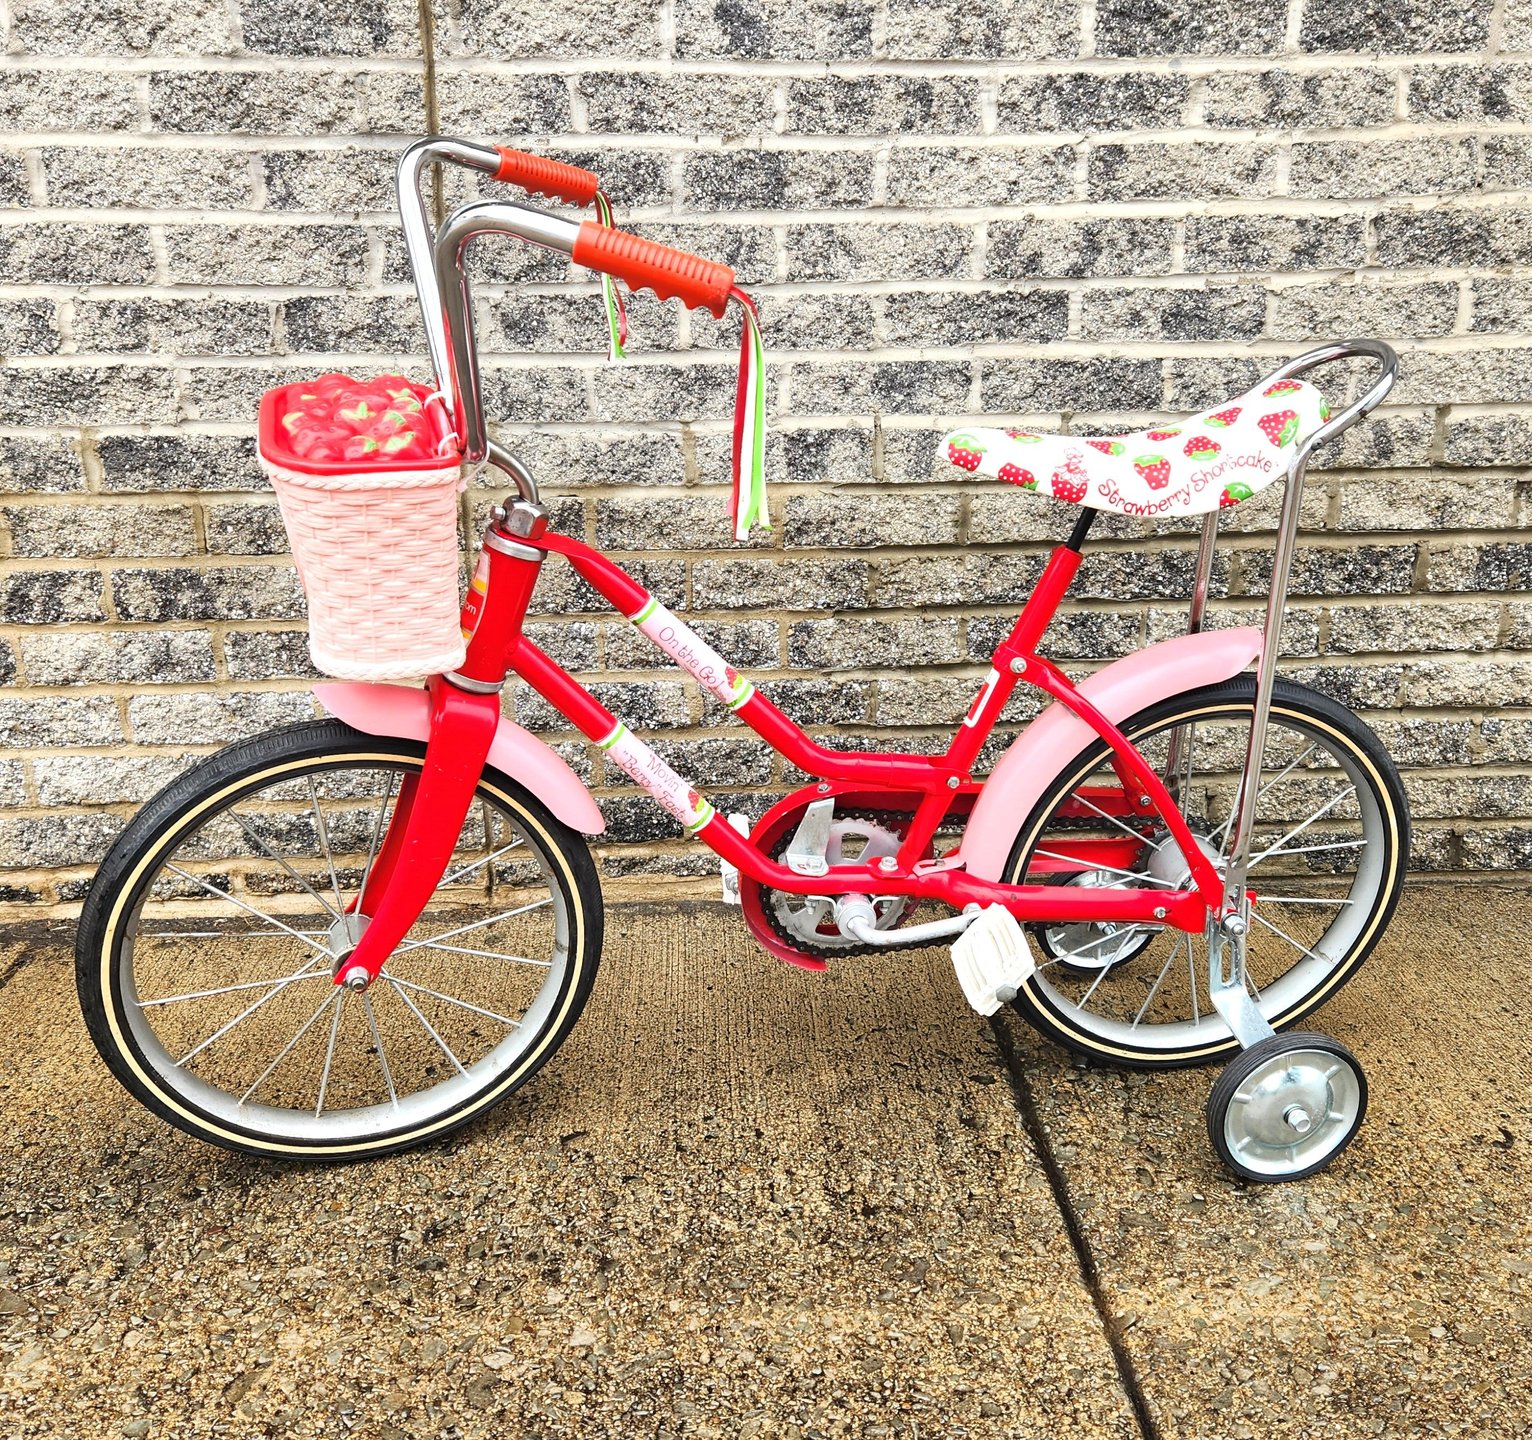 1983 Strawberry Shortcake Girl's Bicycle | Premier Auction